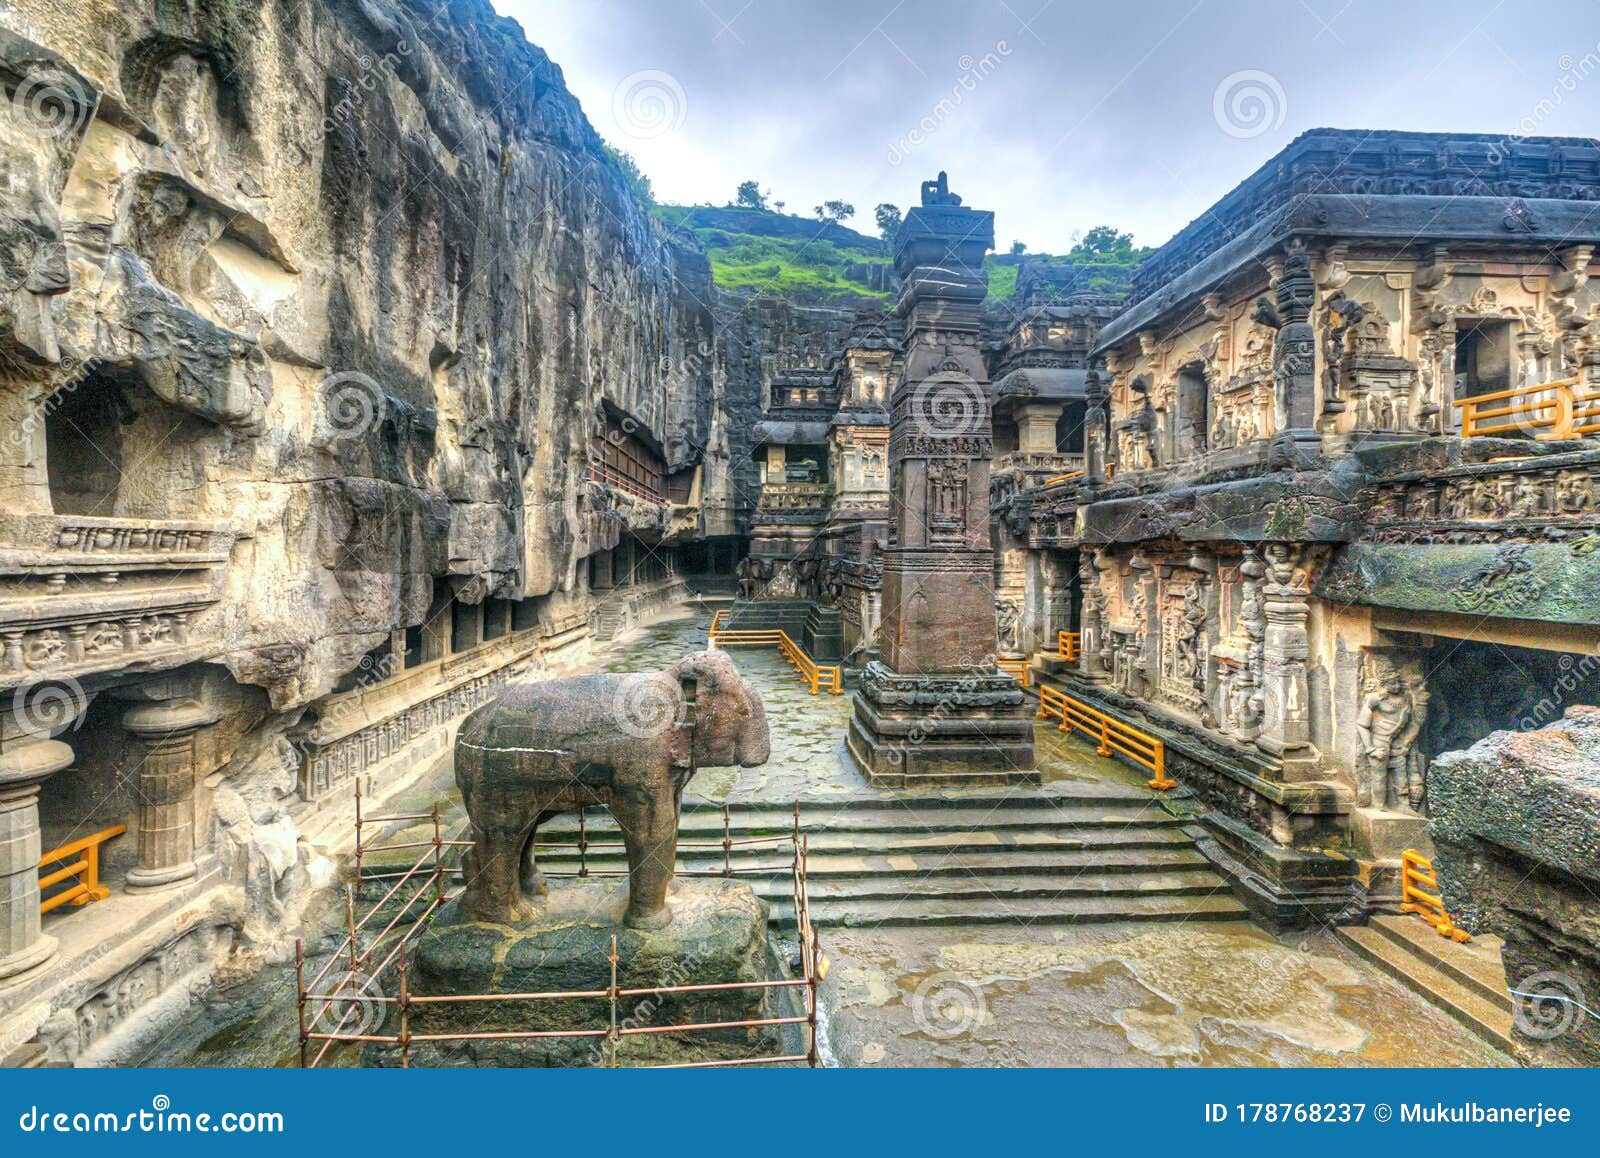 The Kailasa Or Kailasanatha Temple Is One Of The Largest Rock Cut Ancient Hindu Temples Cave